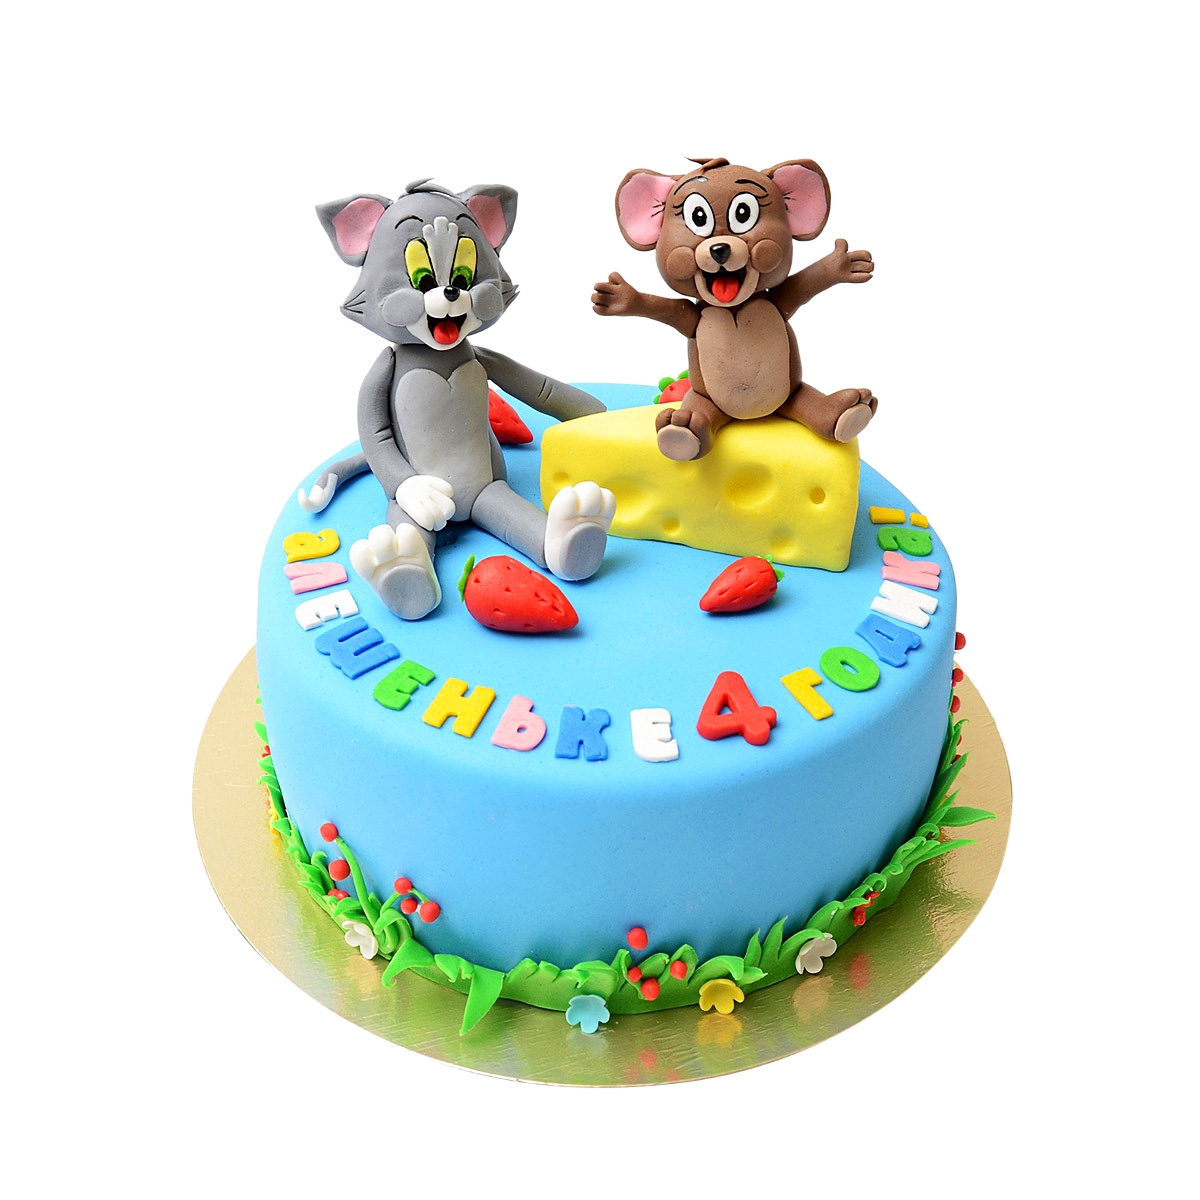 Product Cake to order - For Kids